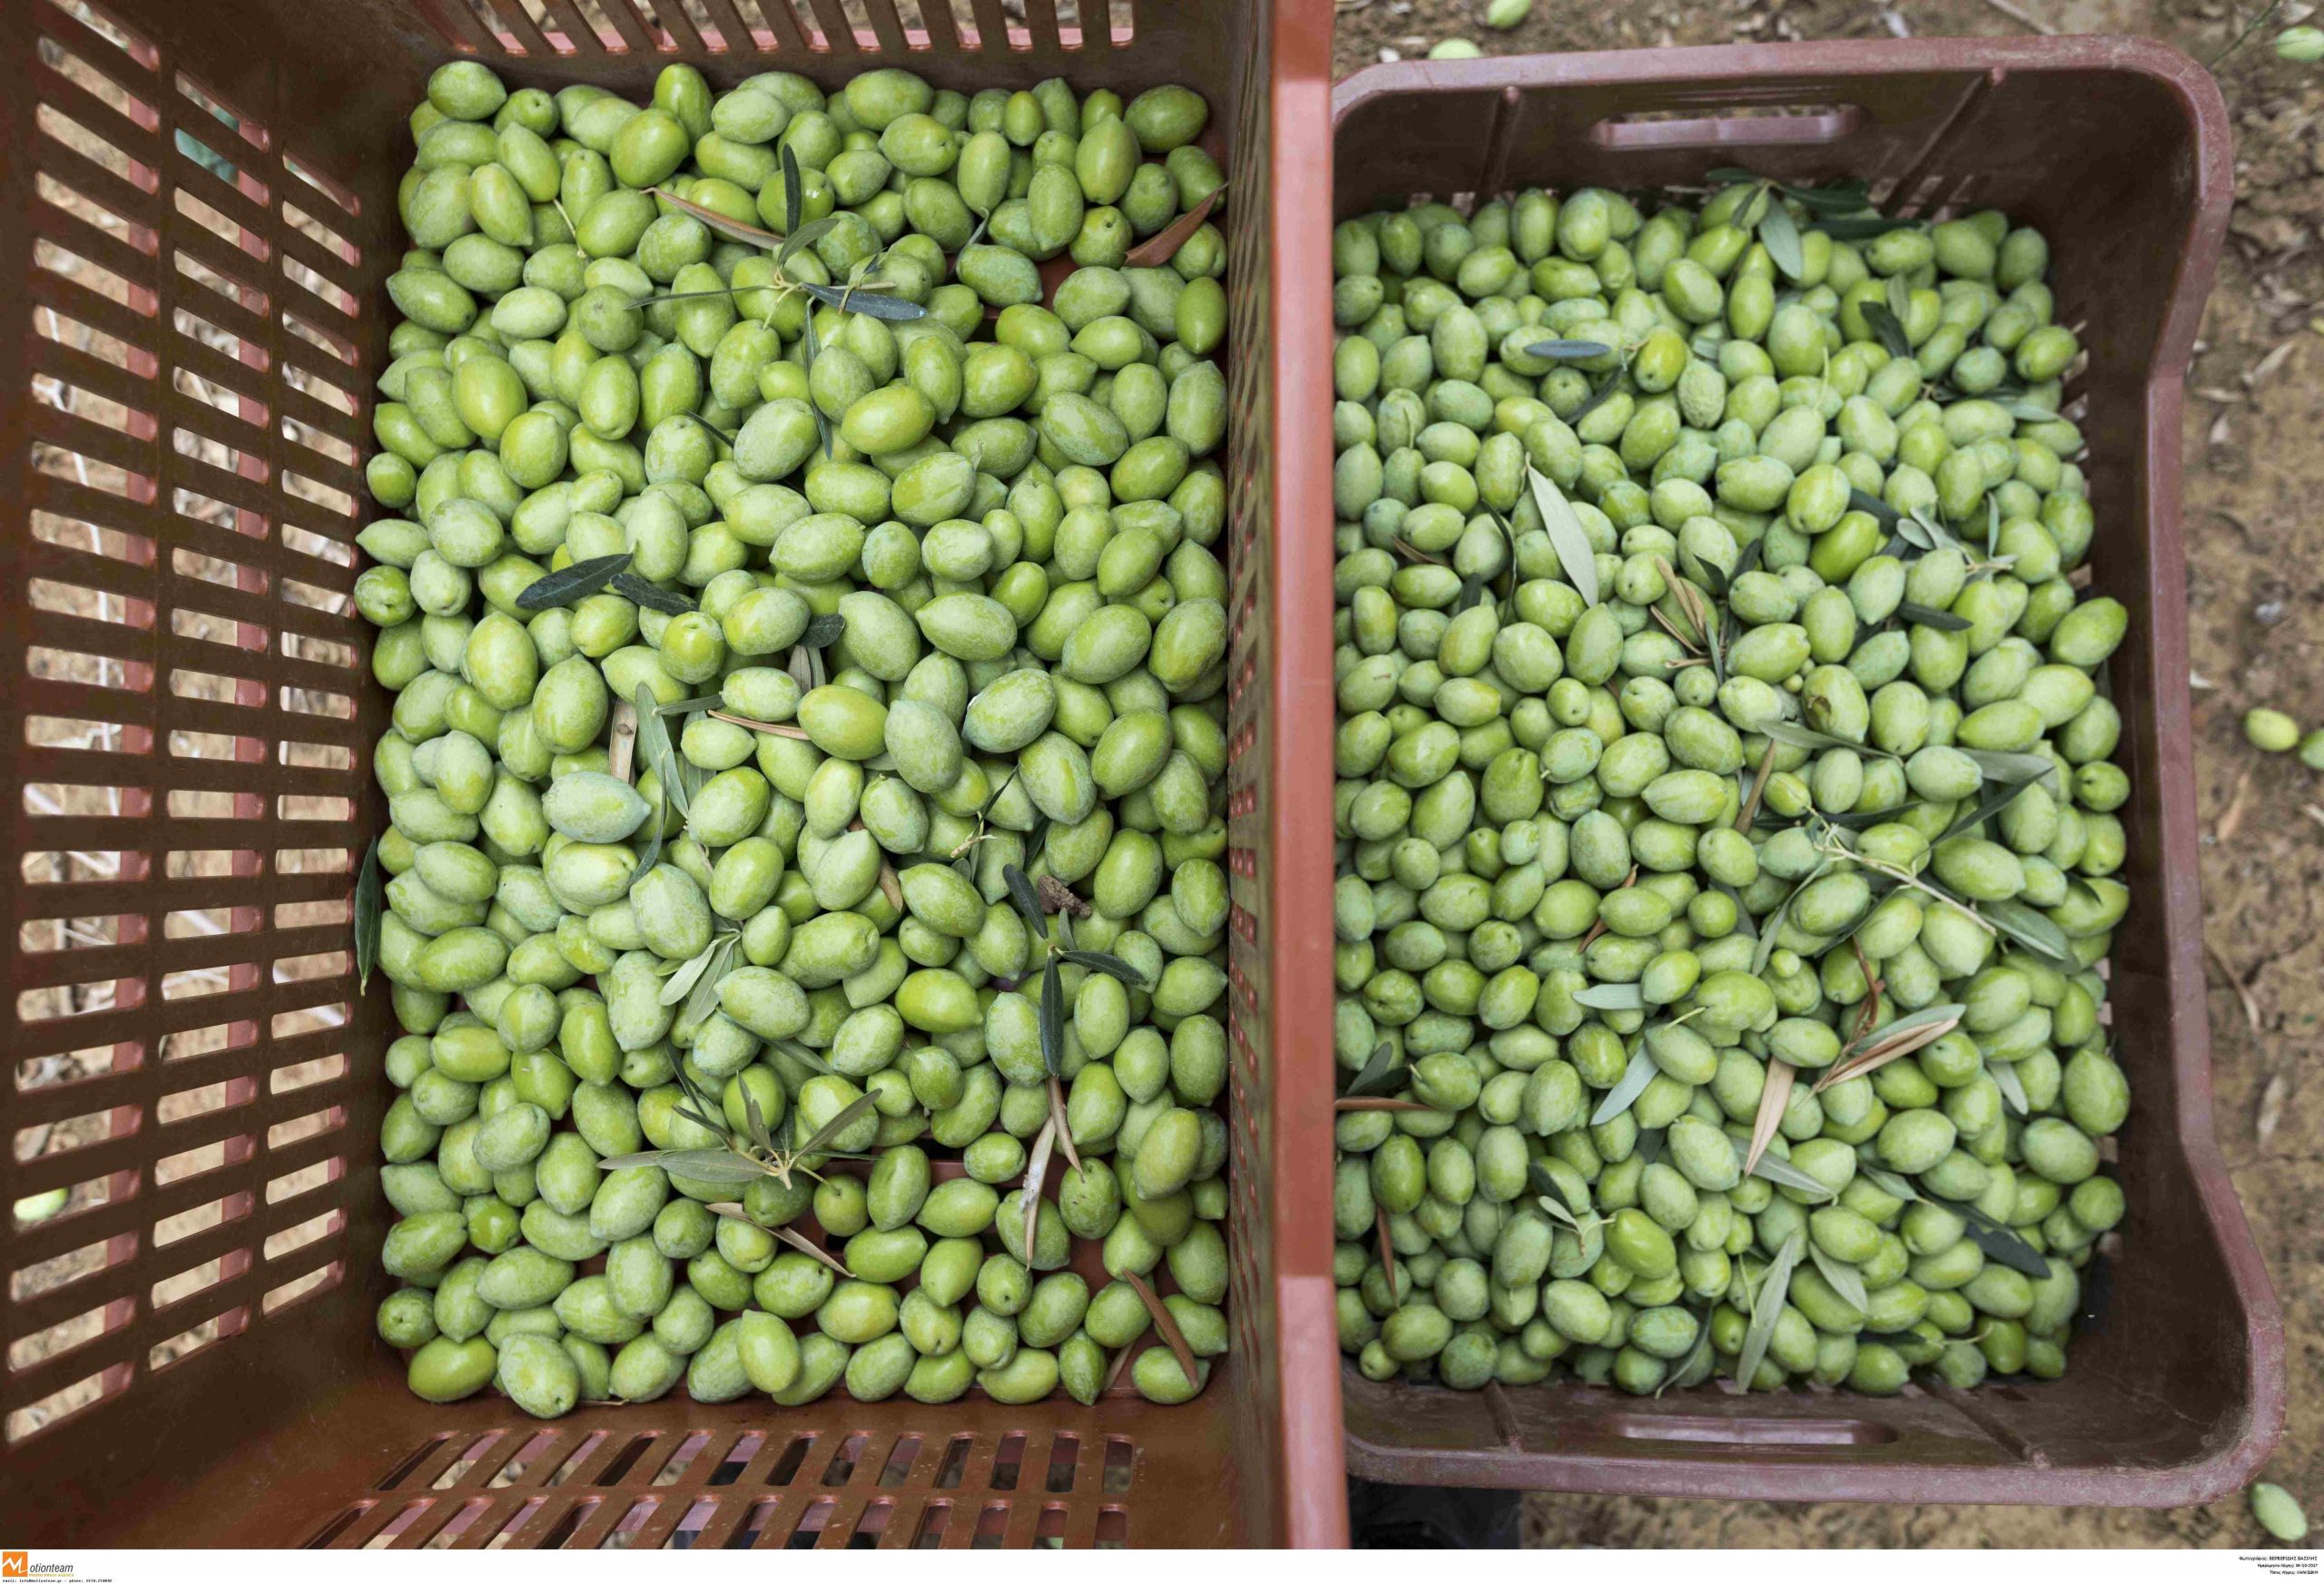 DEOPEL: Severe Consequences for Table Olives Due to Lack of Field Workers